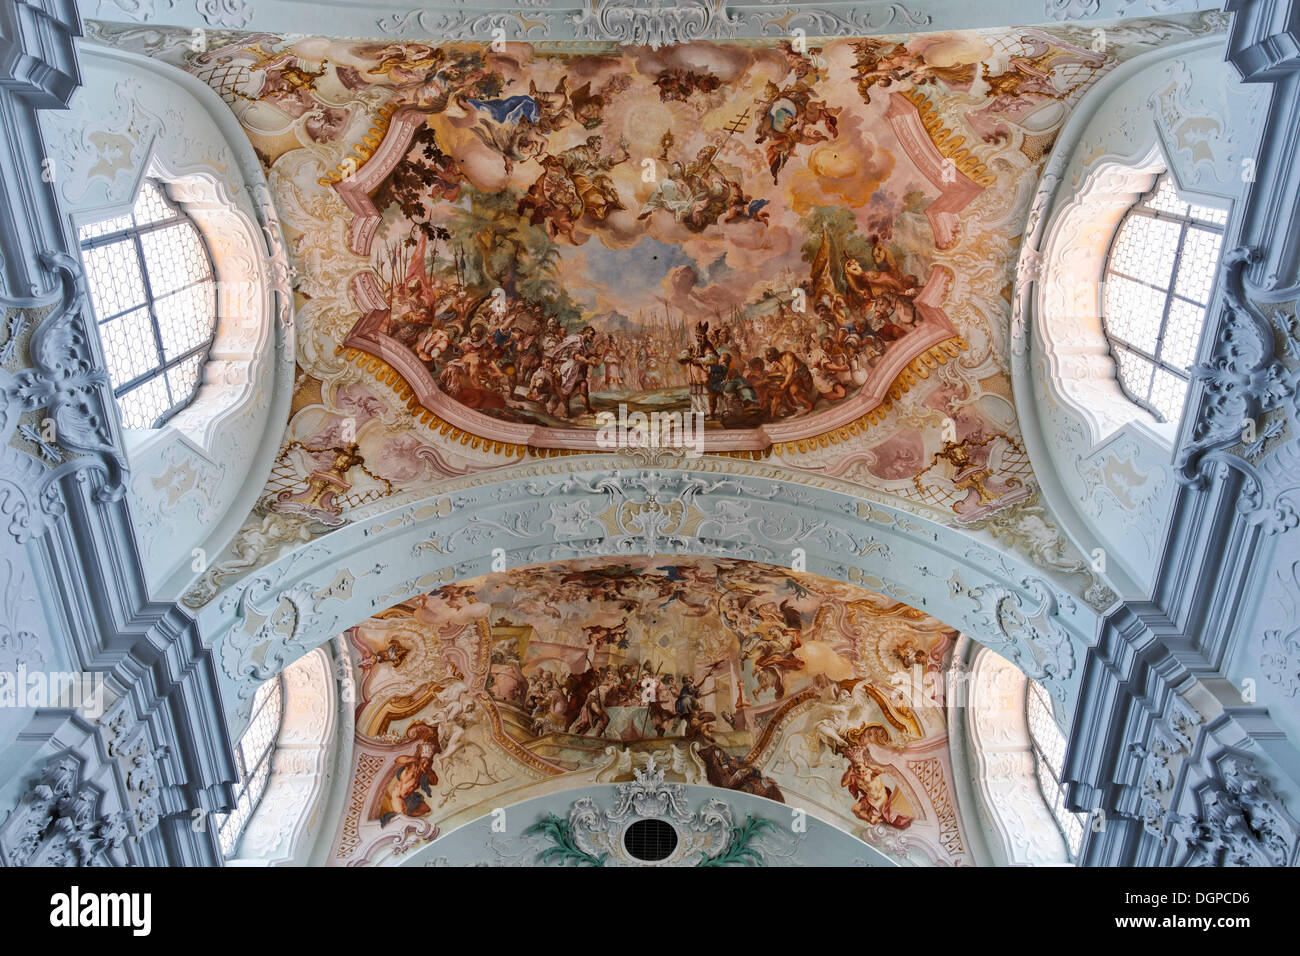 Ceiling frescoes by Wolfgang Andreas Heindl, Parish Church of St. George, Pfarrkirchen bei Bad Hall, Traunviertel district Stock Photo